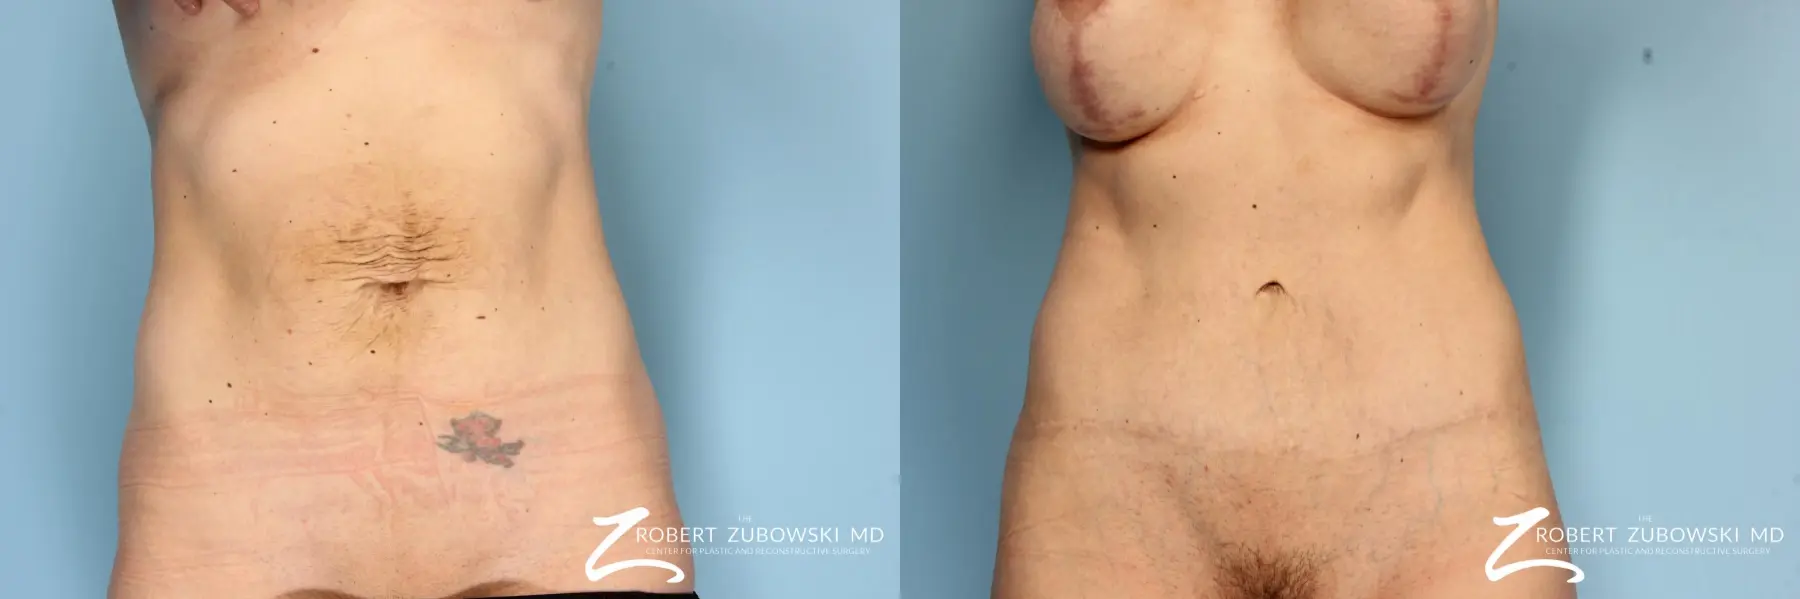 Tummy Tuck: Patient 8 - Before and After 1